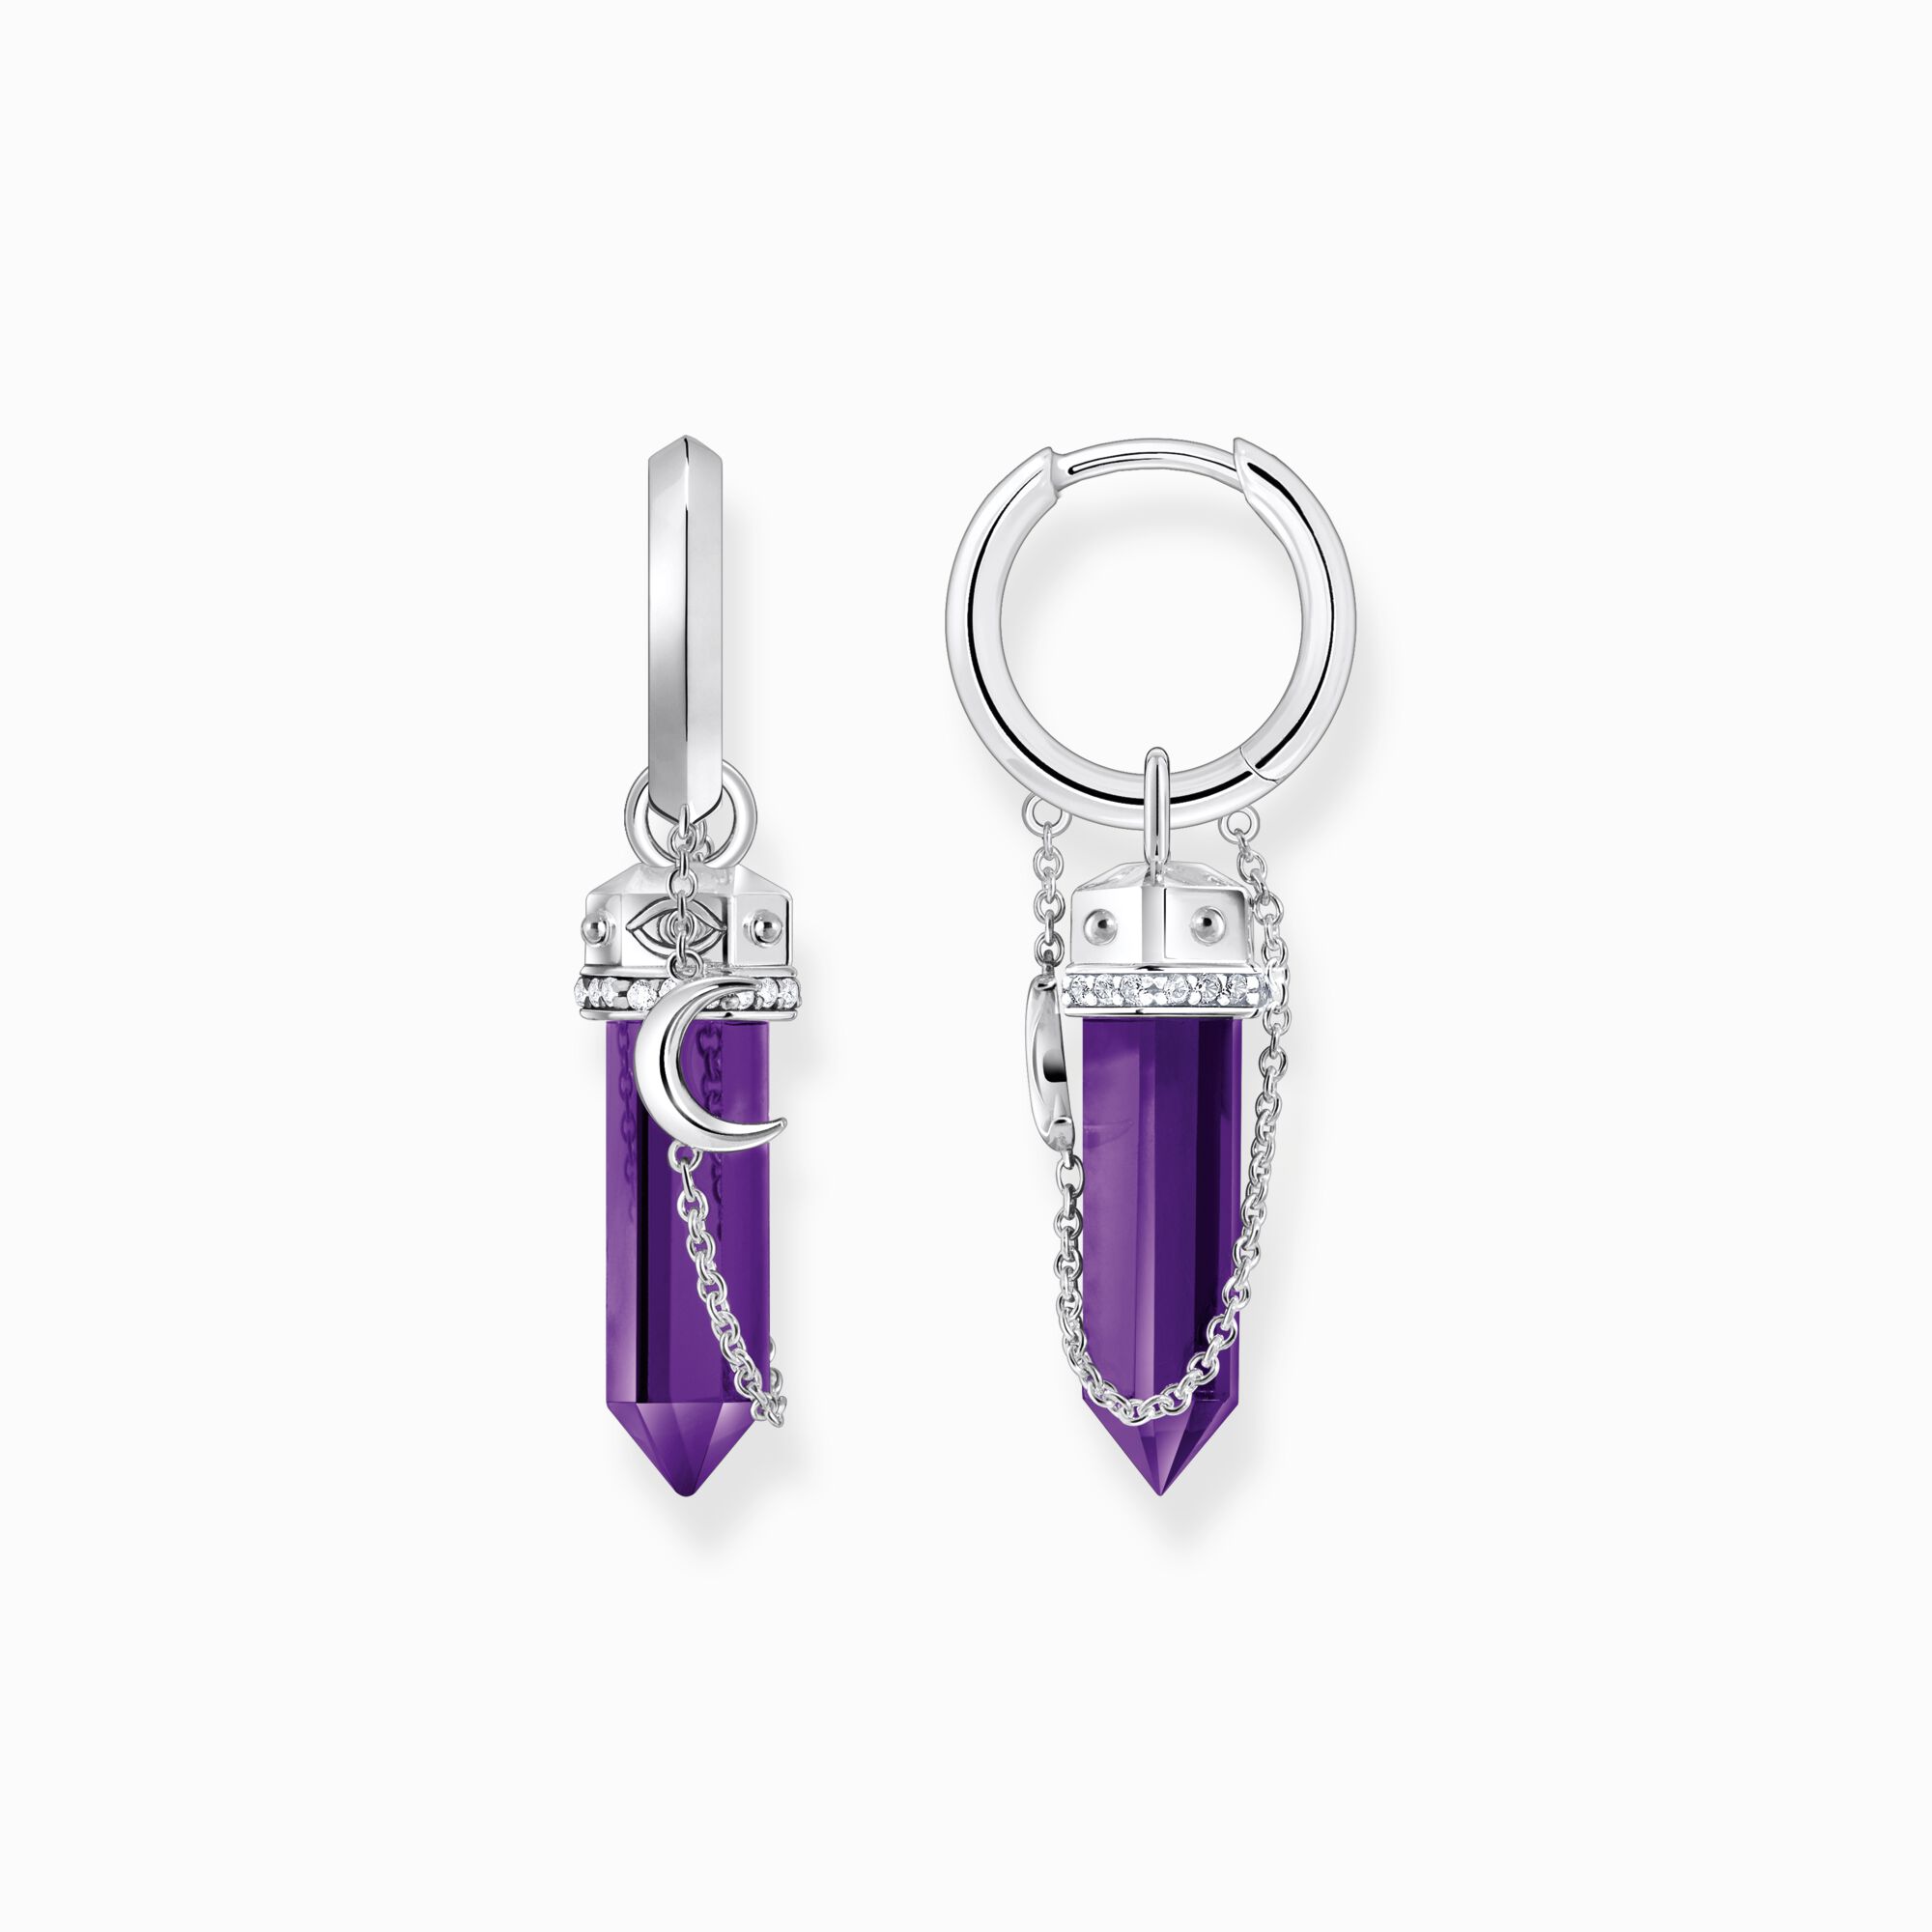 Silver hoop earrings with imitation amethysts and delicate chain from the  collection in the THOMAS SABO online store